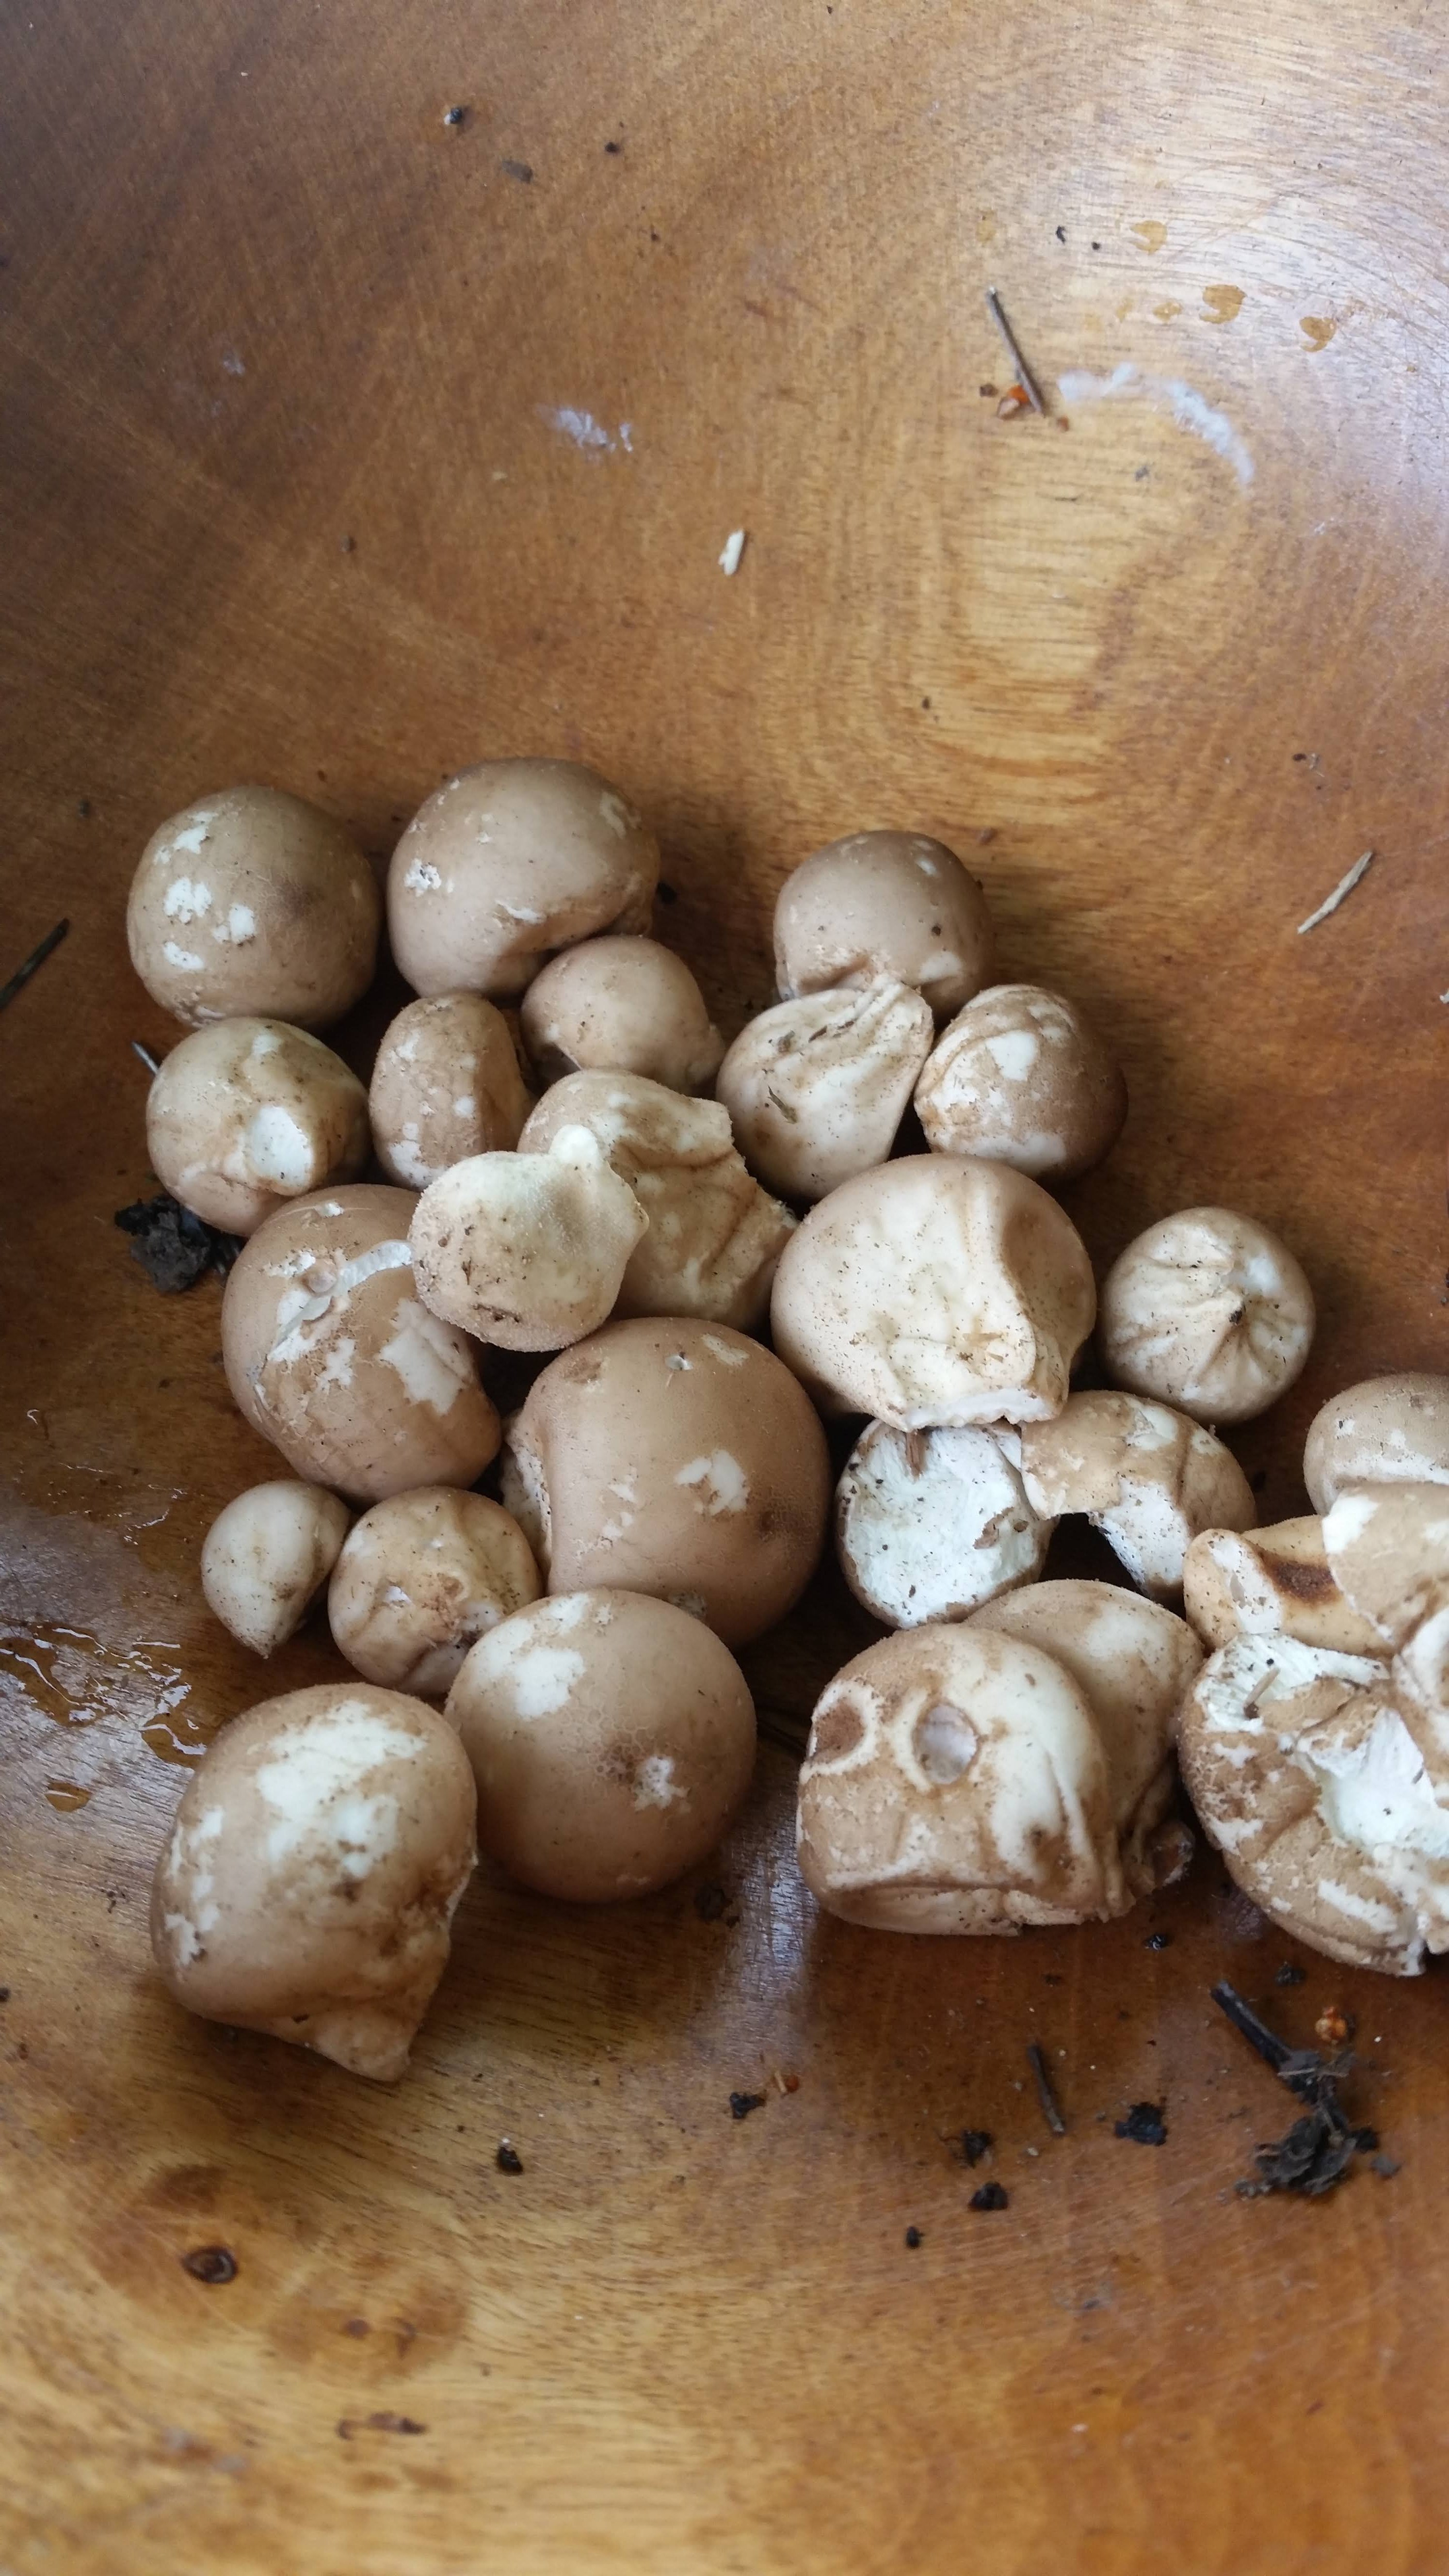 Introductory Mushroom Identification course with Viki Mather- Sunday October 1st 9:30-3:30!!